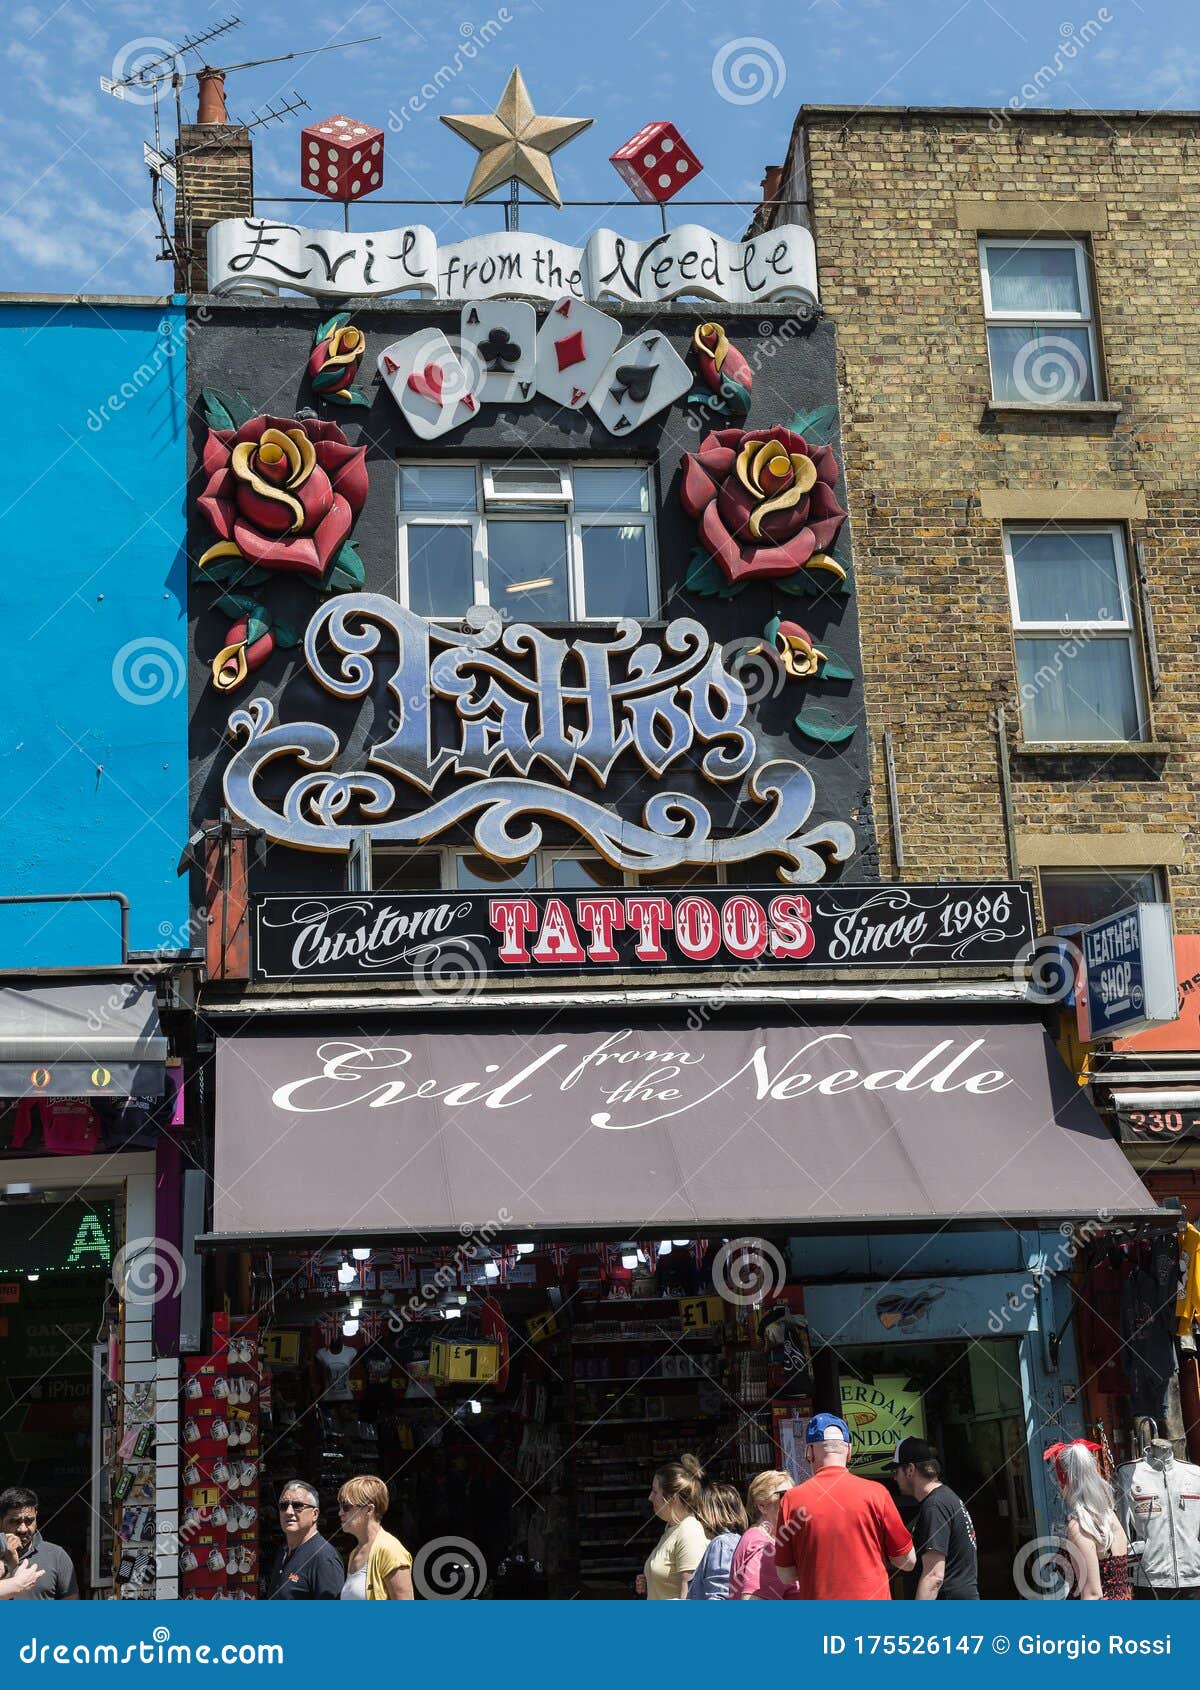 Typical Tattoo Store in Camden Town in London, England Editorial Photography - Image of attraction, landmark: 175526147